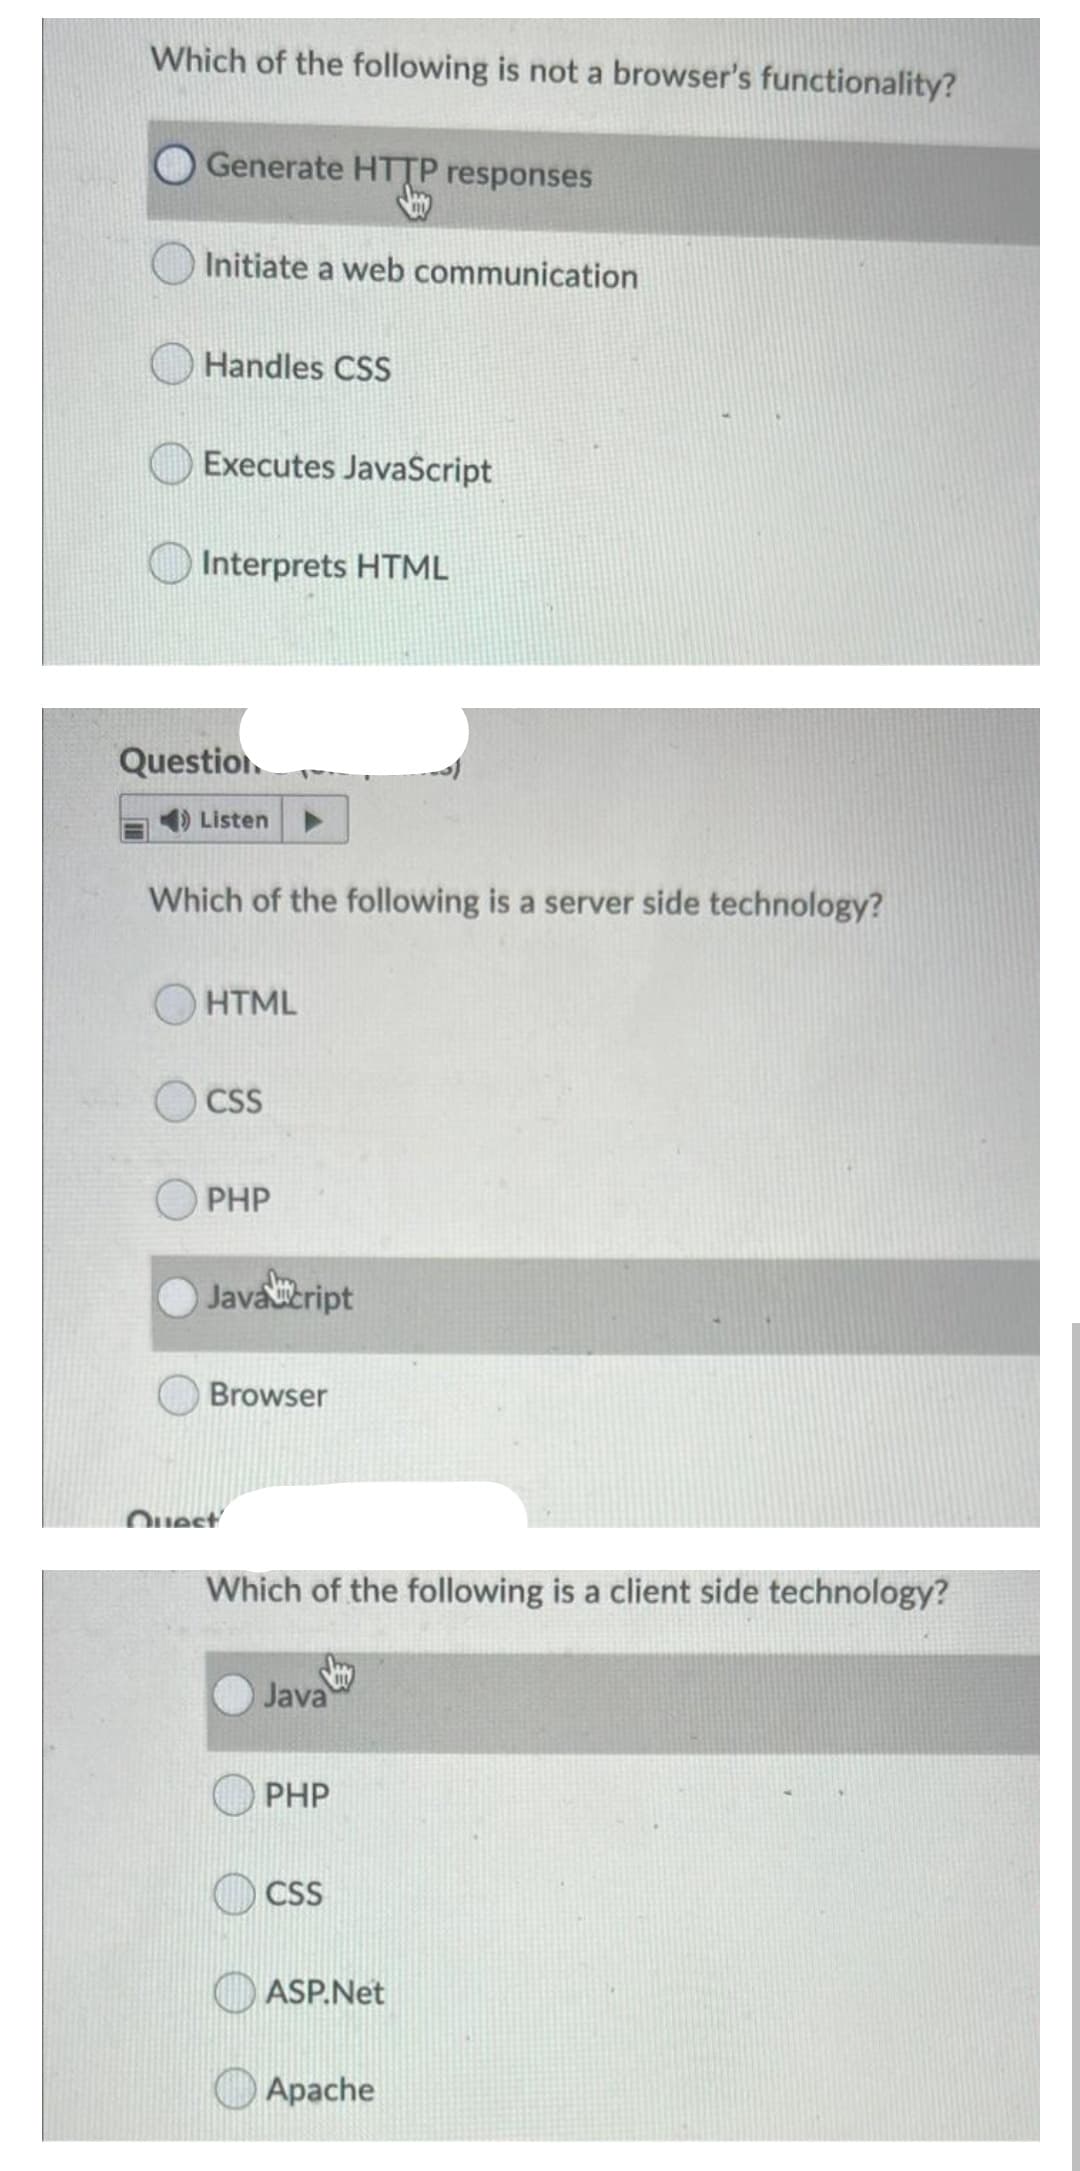 Which of the following is not a browser's functionality?
Generate HTTP responses
Initiate a web communication
Handles CSS
Executes JavaScript
Interprets HTML
Question.
Listen
Which of the following is a server side technology?
O HTML
CSS
PHP
Javaeript
Browser
Quest
Which of the following is a client side technology?
Java
PHP
CSS
ASP.Net
Apache
